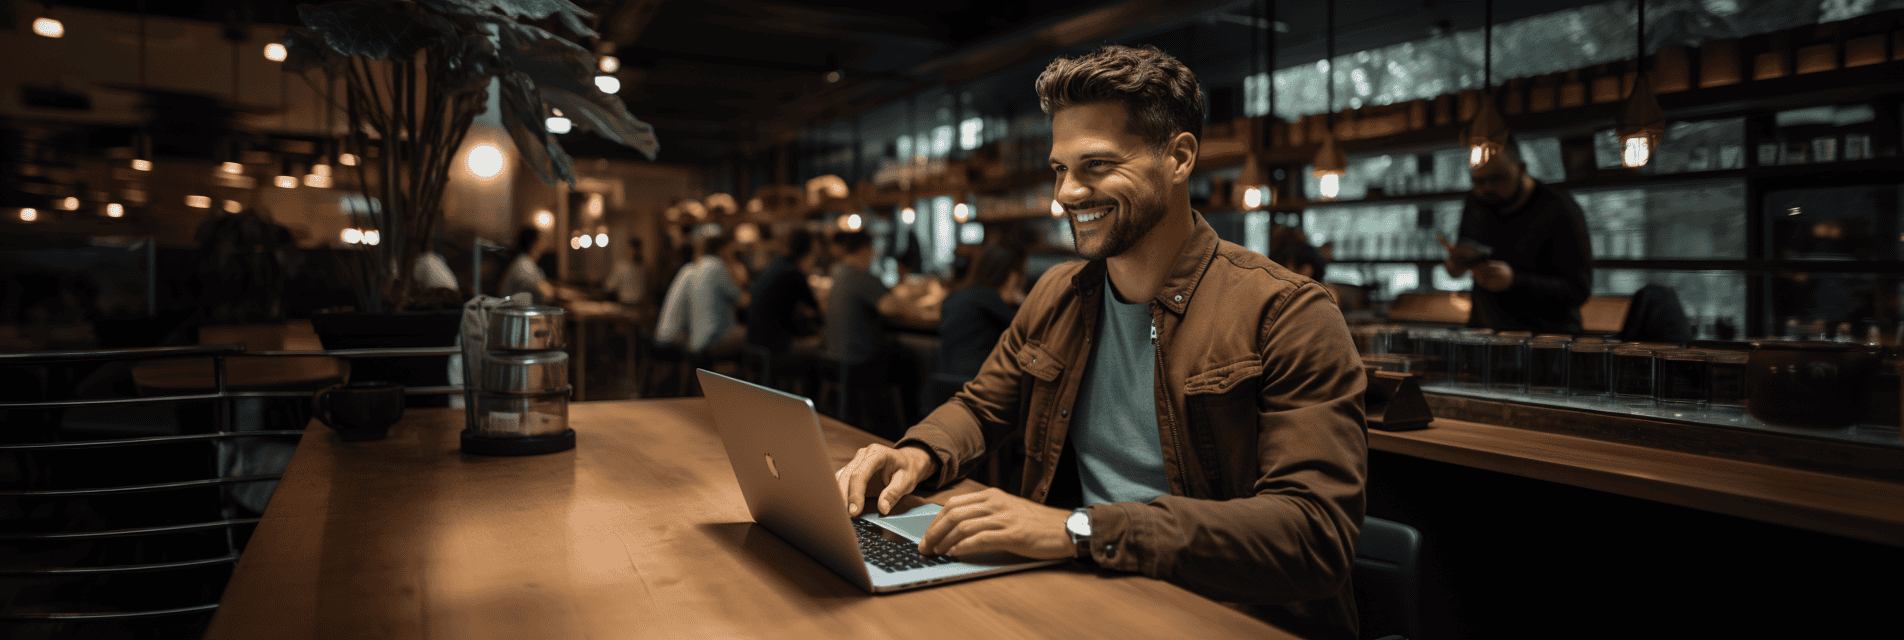 Project leader realizes he can create a free Notion account directly from the website, allowing him to write updates from anywhere and publish pages for colleagues to see.